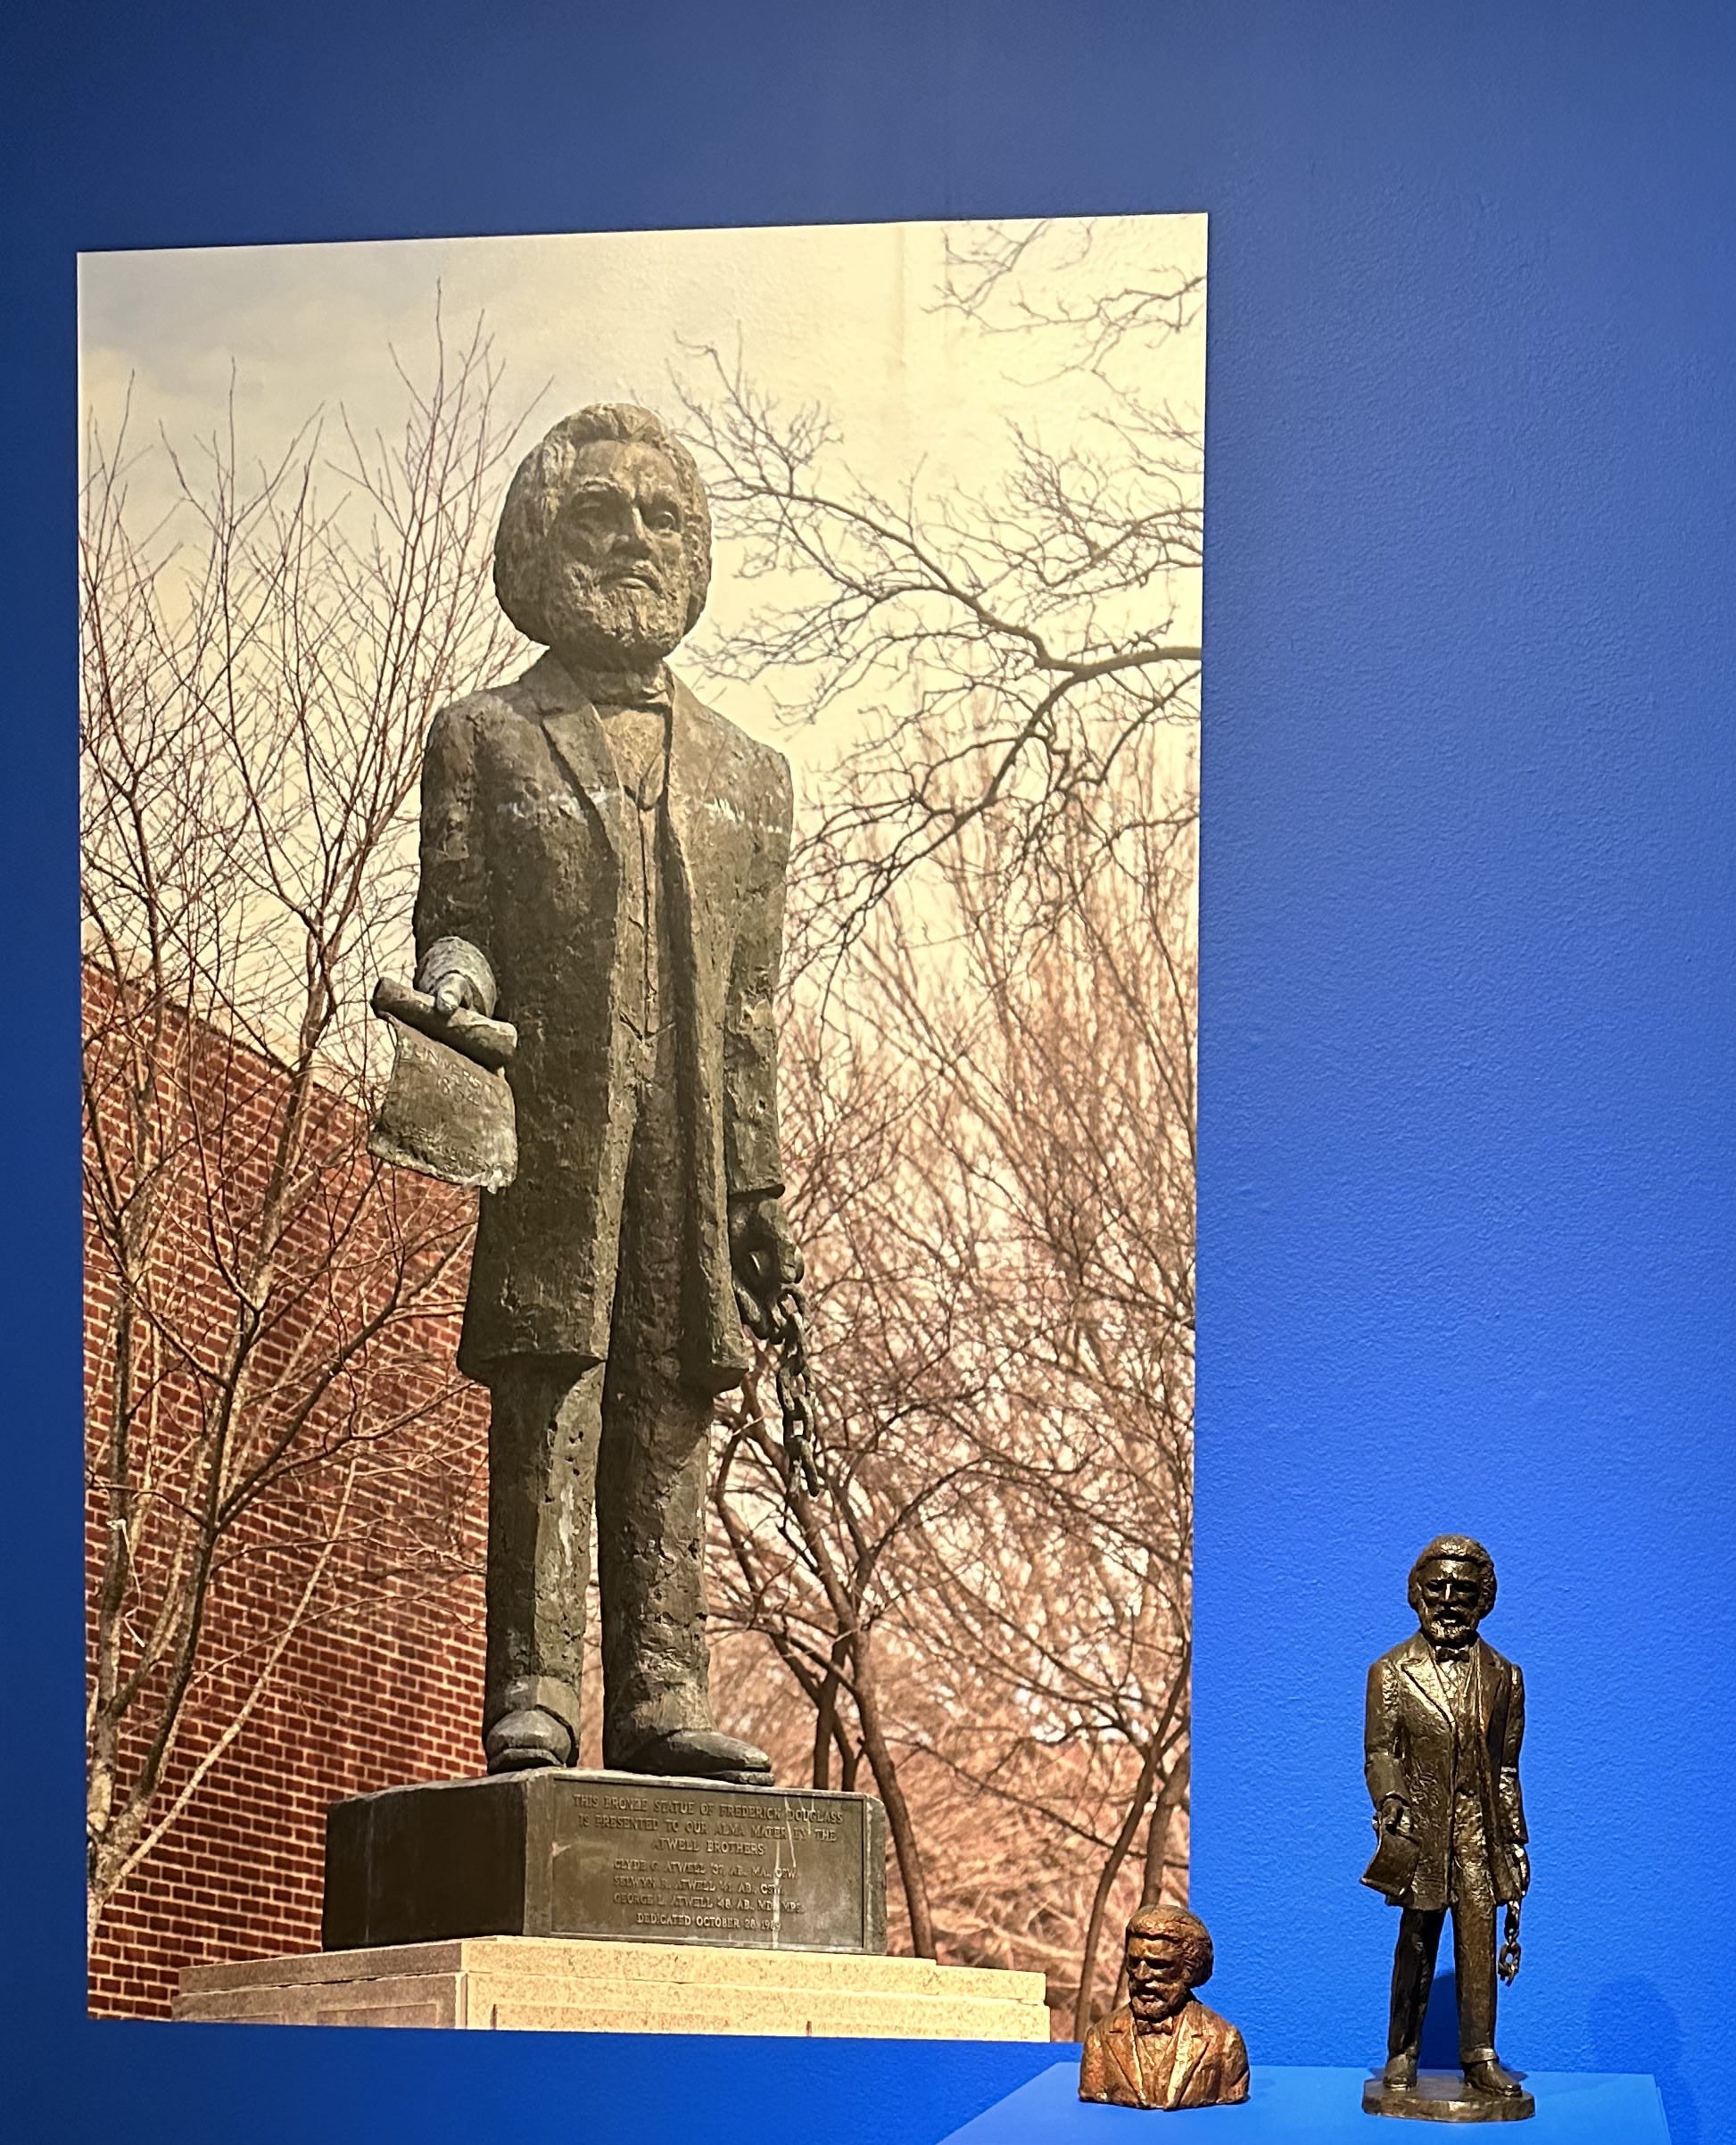 Frderick Douglass maquette and image in background